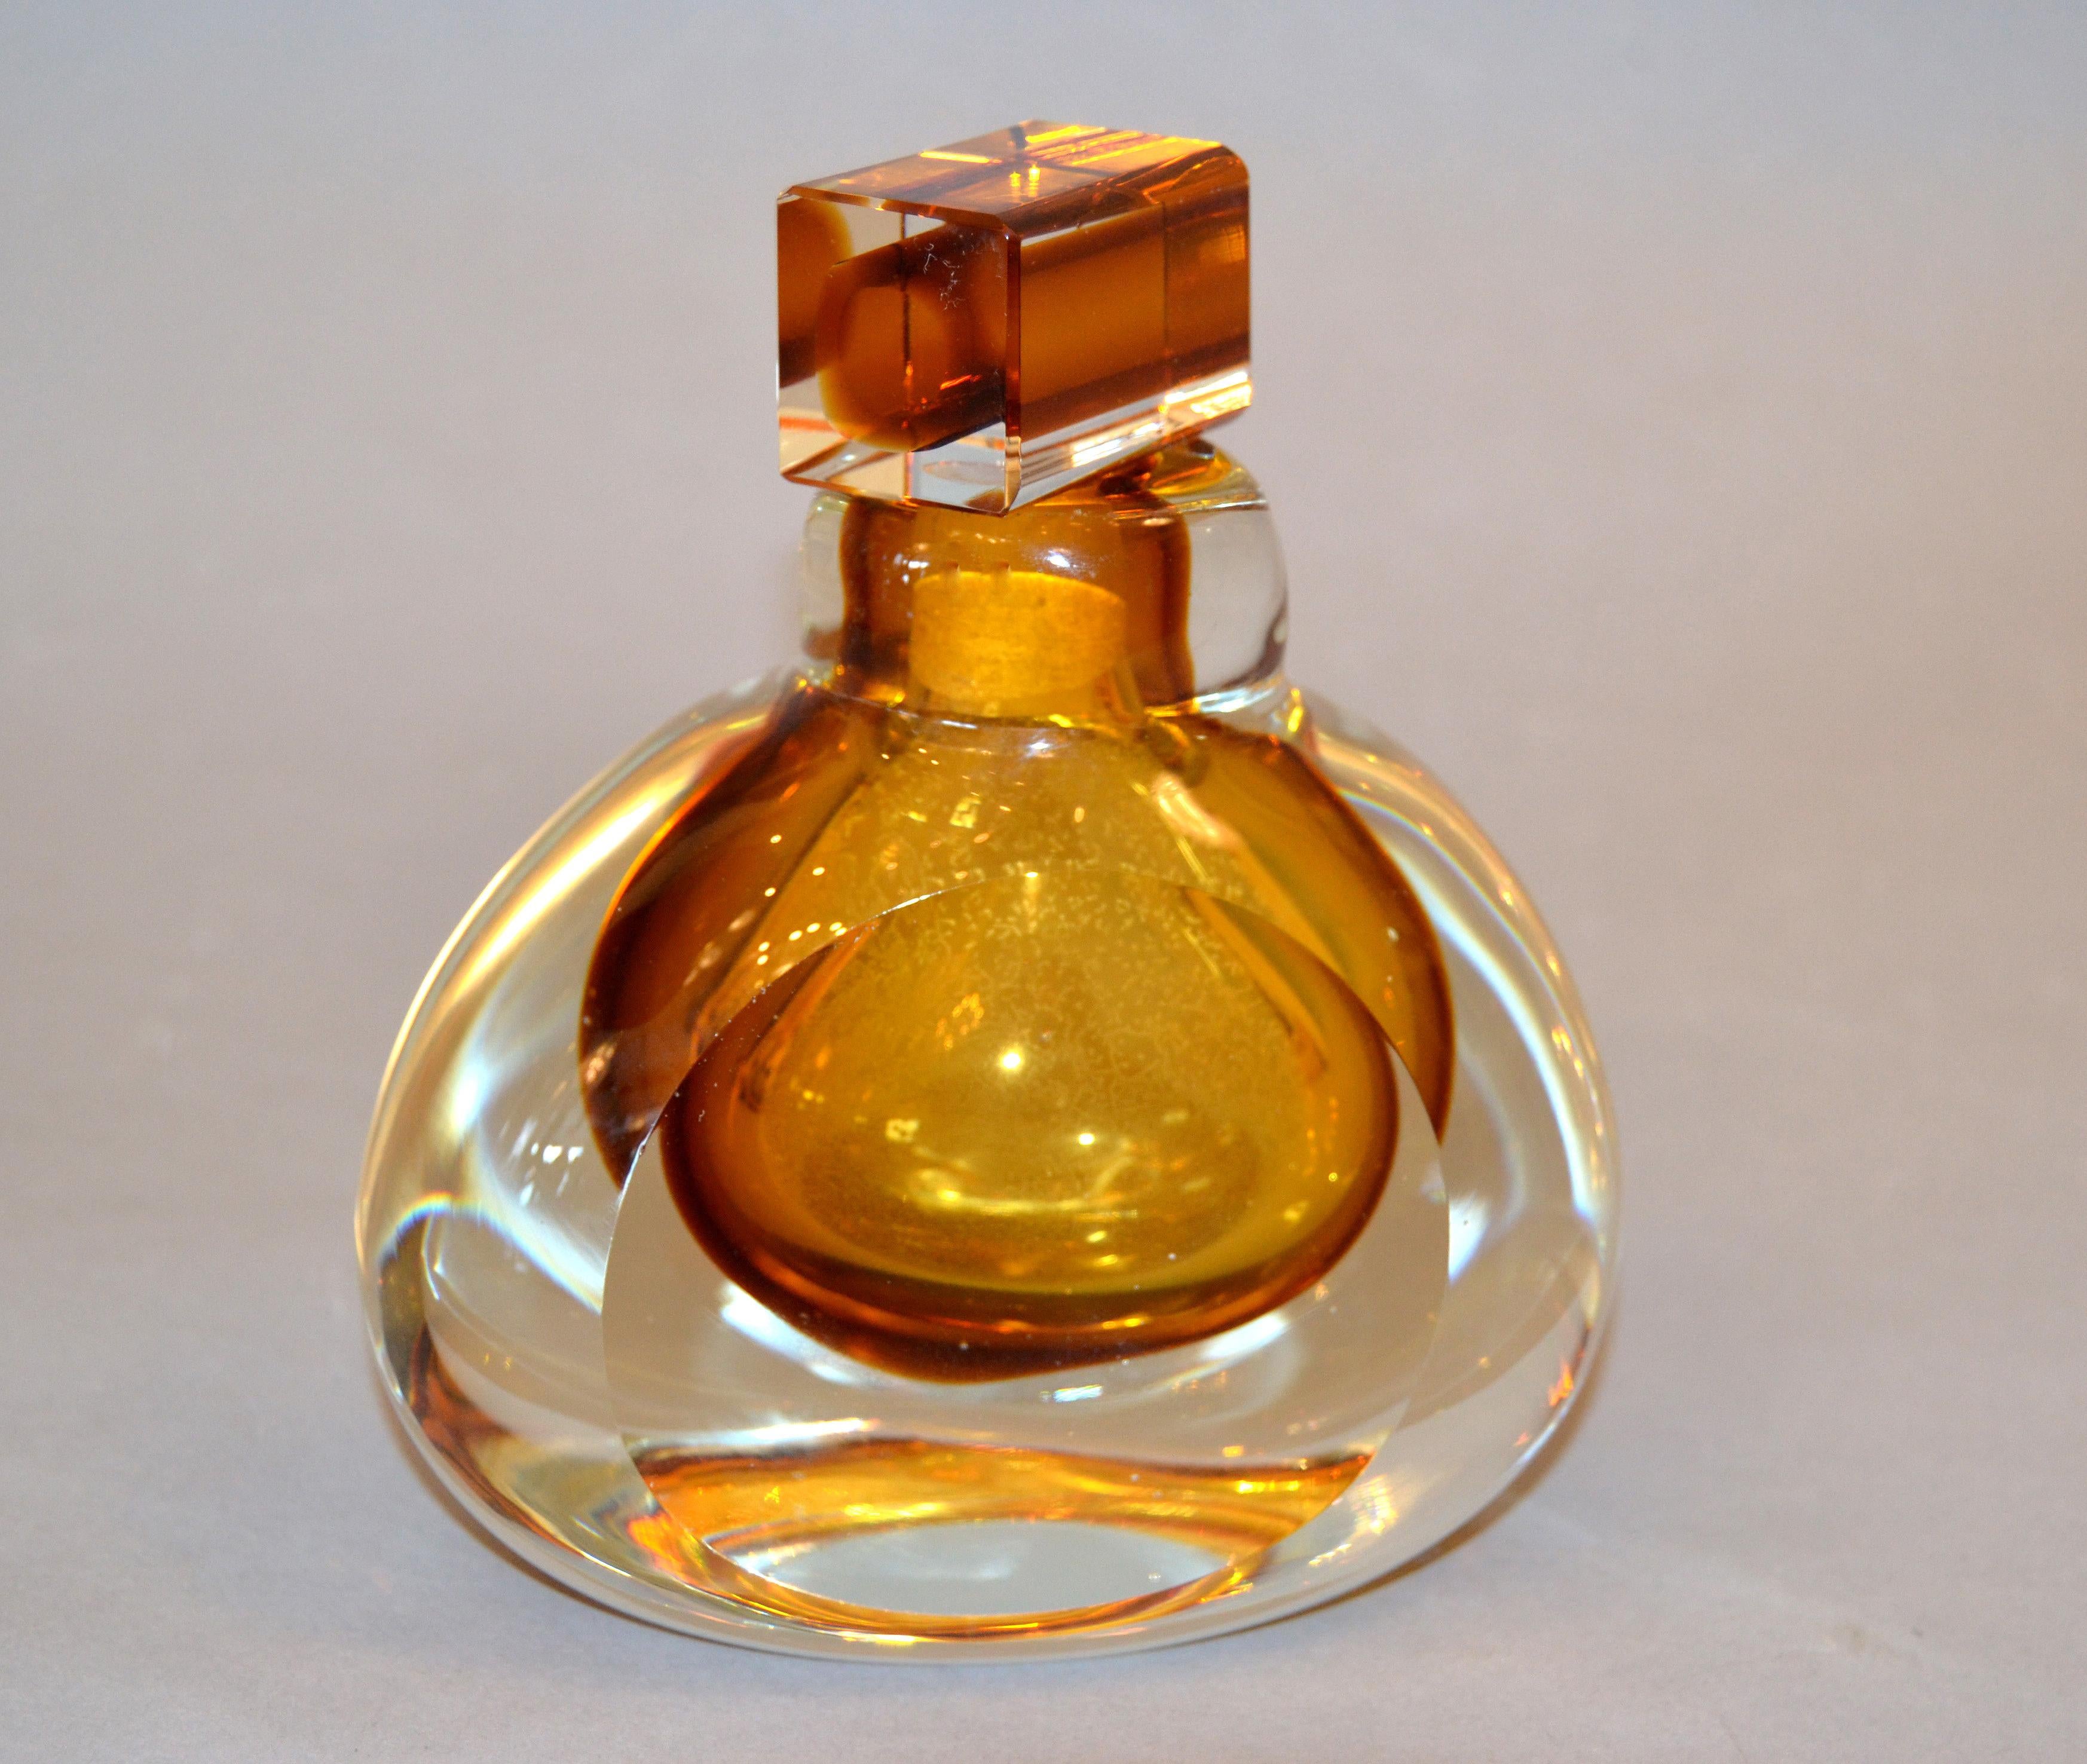 Vintage clear and amber inclusions with controlled bubbles Murano art glass perfume bottle with a stopper.
Heavy perfume flacon which looks different from each angle.
Beautiful for your Boudoir. 
  